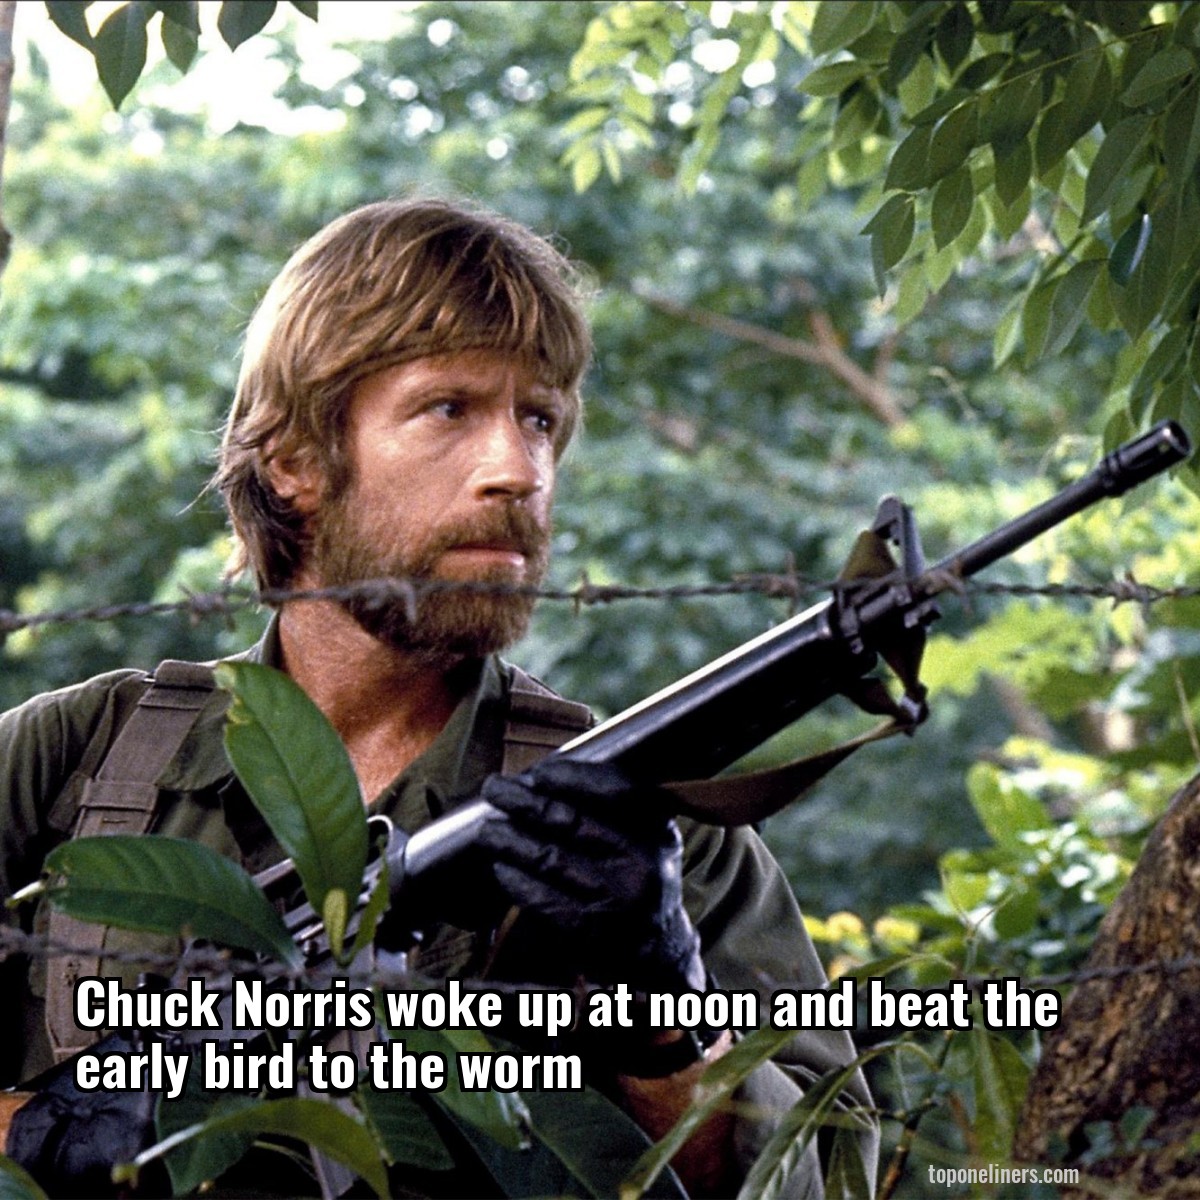 Chuck Norris woke up at noon and beat the early bird to the worm